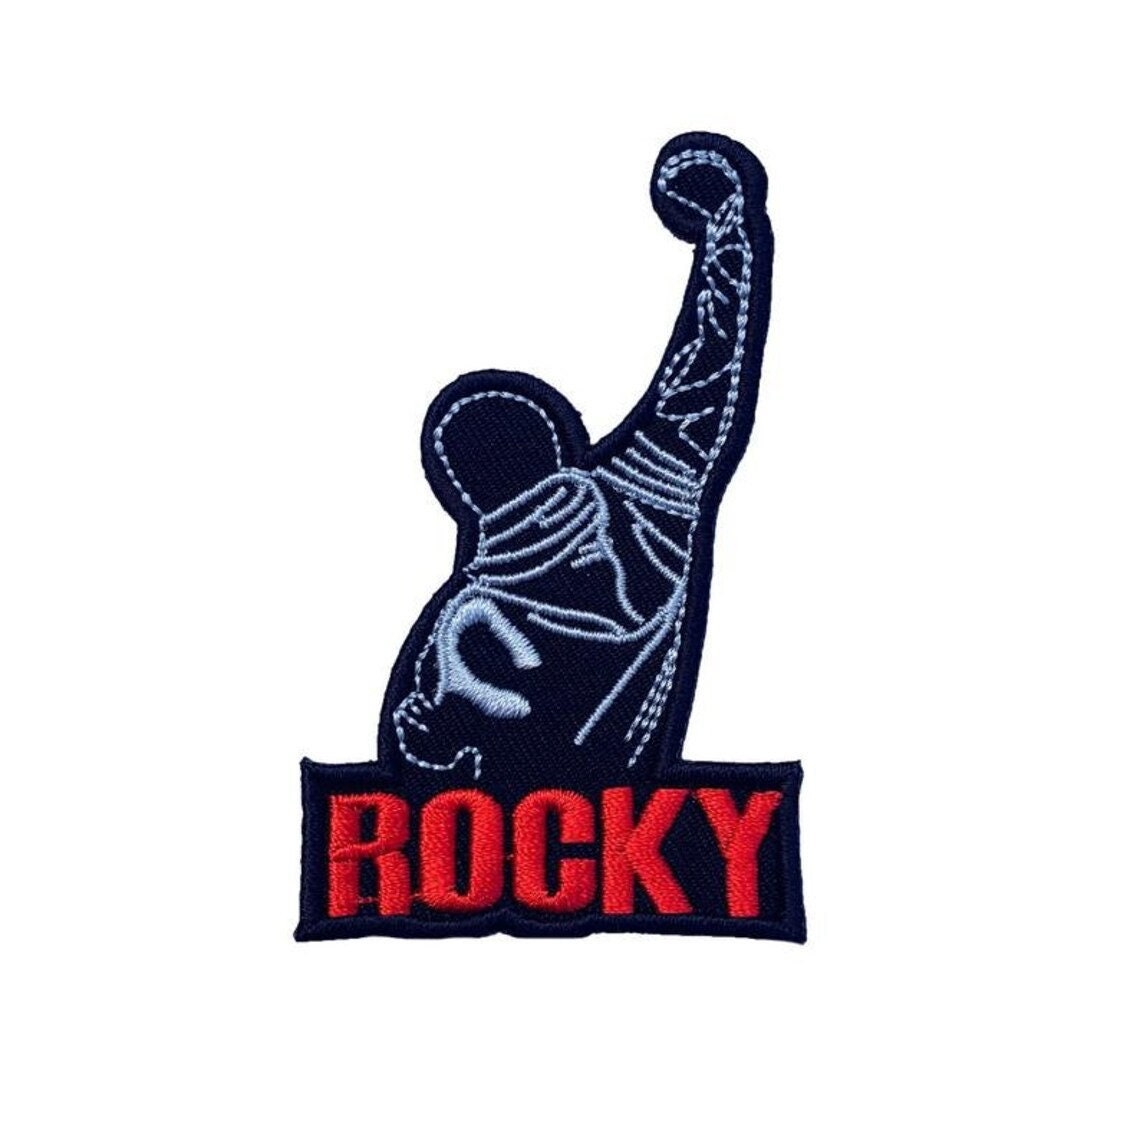 Rocky Balboa Patch Iron-on Badge Movie Costume Sly Stallone Boxing GIFT 3 Inch 